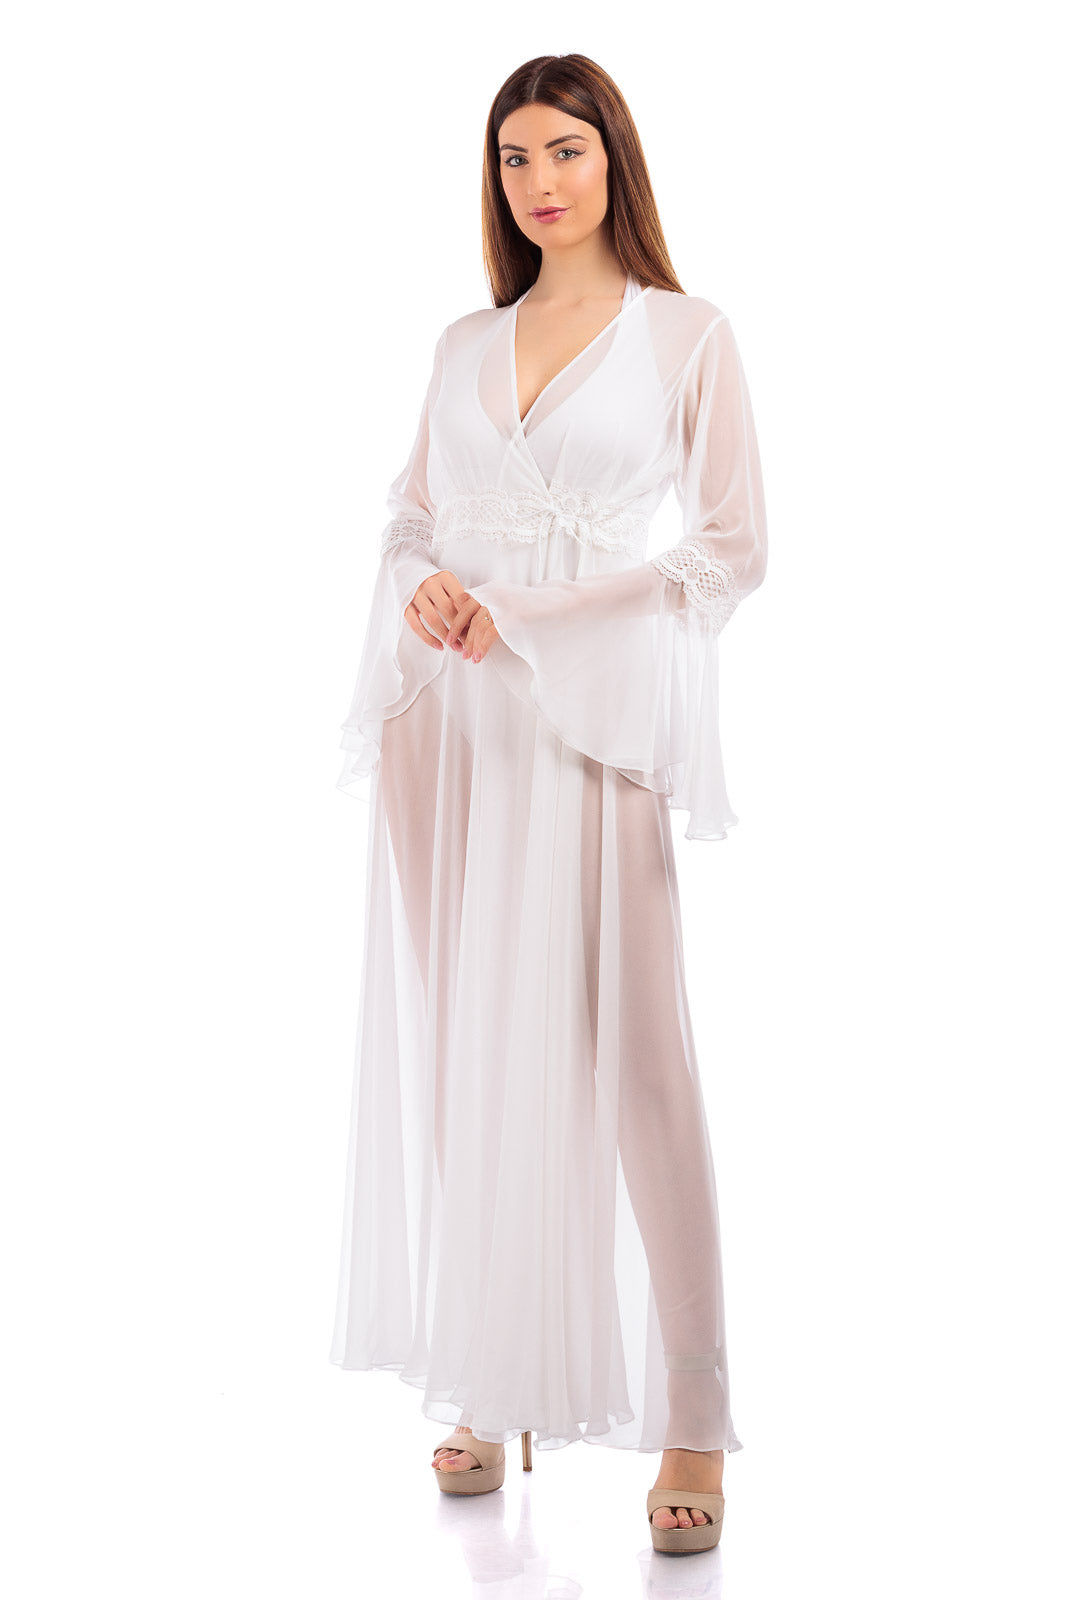 Long Plain Chiffon Robe Cover Up  (with lace finish)